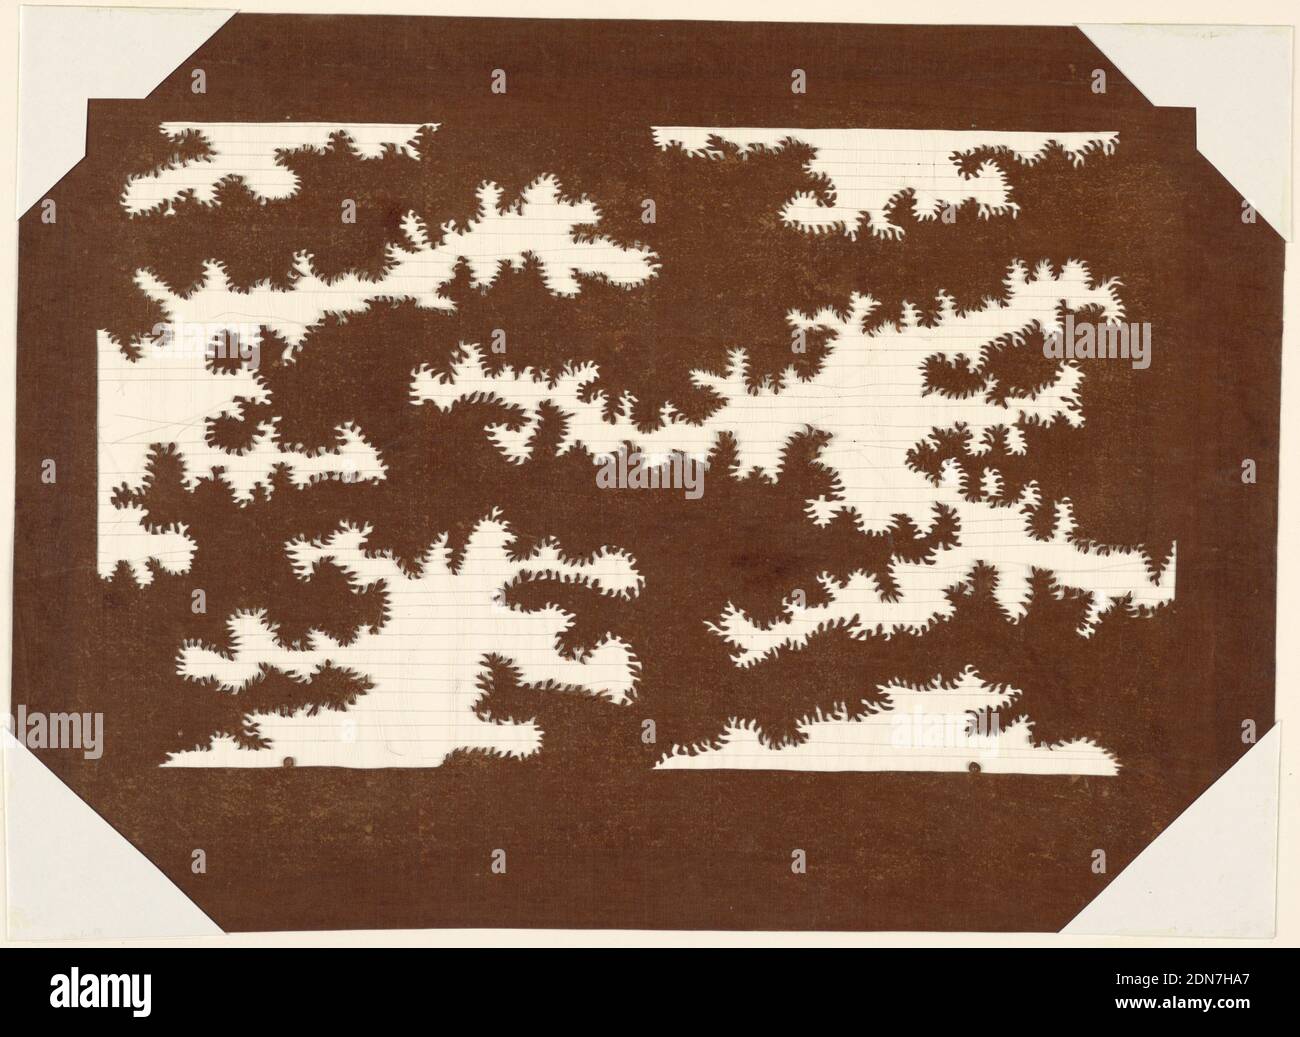 Tree Tops, Mulberry paper (kozo washi) treated with fermented persimmon tannin (kakishibu), and silk threads (itoire), Treetops are carved out, suggesting that the pattern works in both inversely as well. Silk threads are added to support the structure of the threads., Japan, late 18th - early 19th century, textile designs, Katagami, Katagami Stock Photo